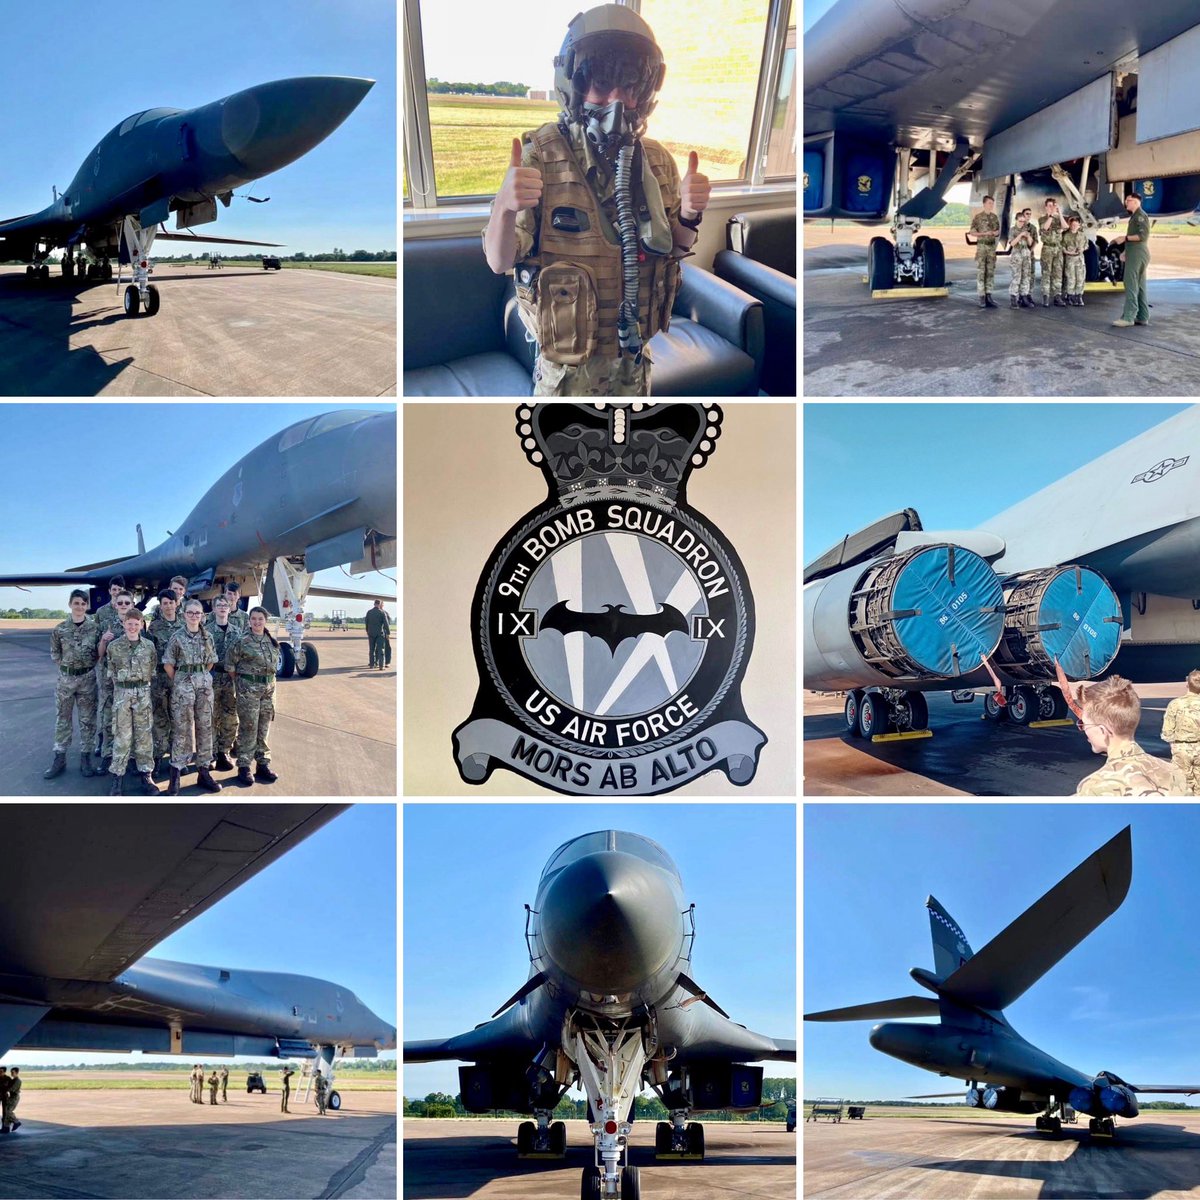 Our @aircadets recently had an opportunity to visit the USAF in Fairford for a tour round the B1 Bomber, taking a look at the aircraft's anatomy, such as the engines, bomb bays, and more.

@DWWaircadets
@ComdtAC
@SWRegionRAFAC
@usairforce

#NoOrdinaryHobby
#ReachingForTheStars